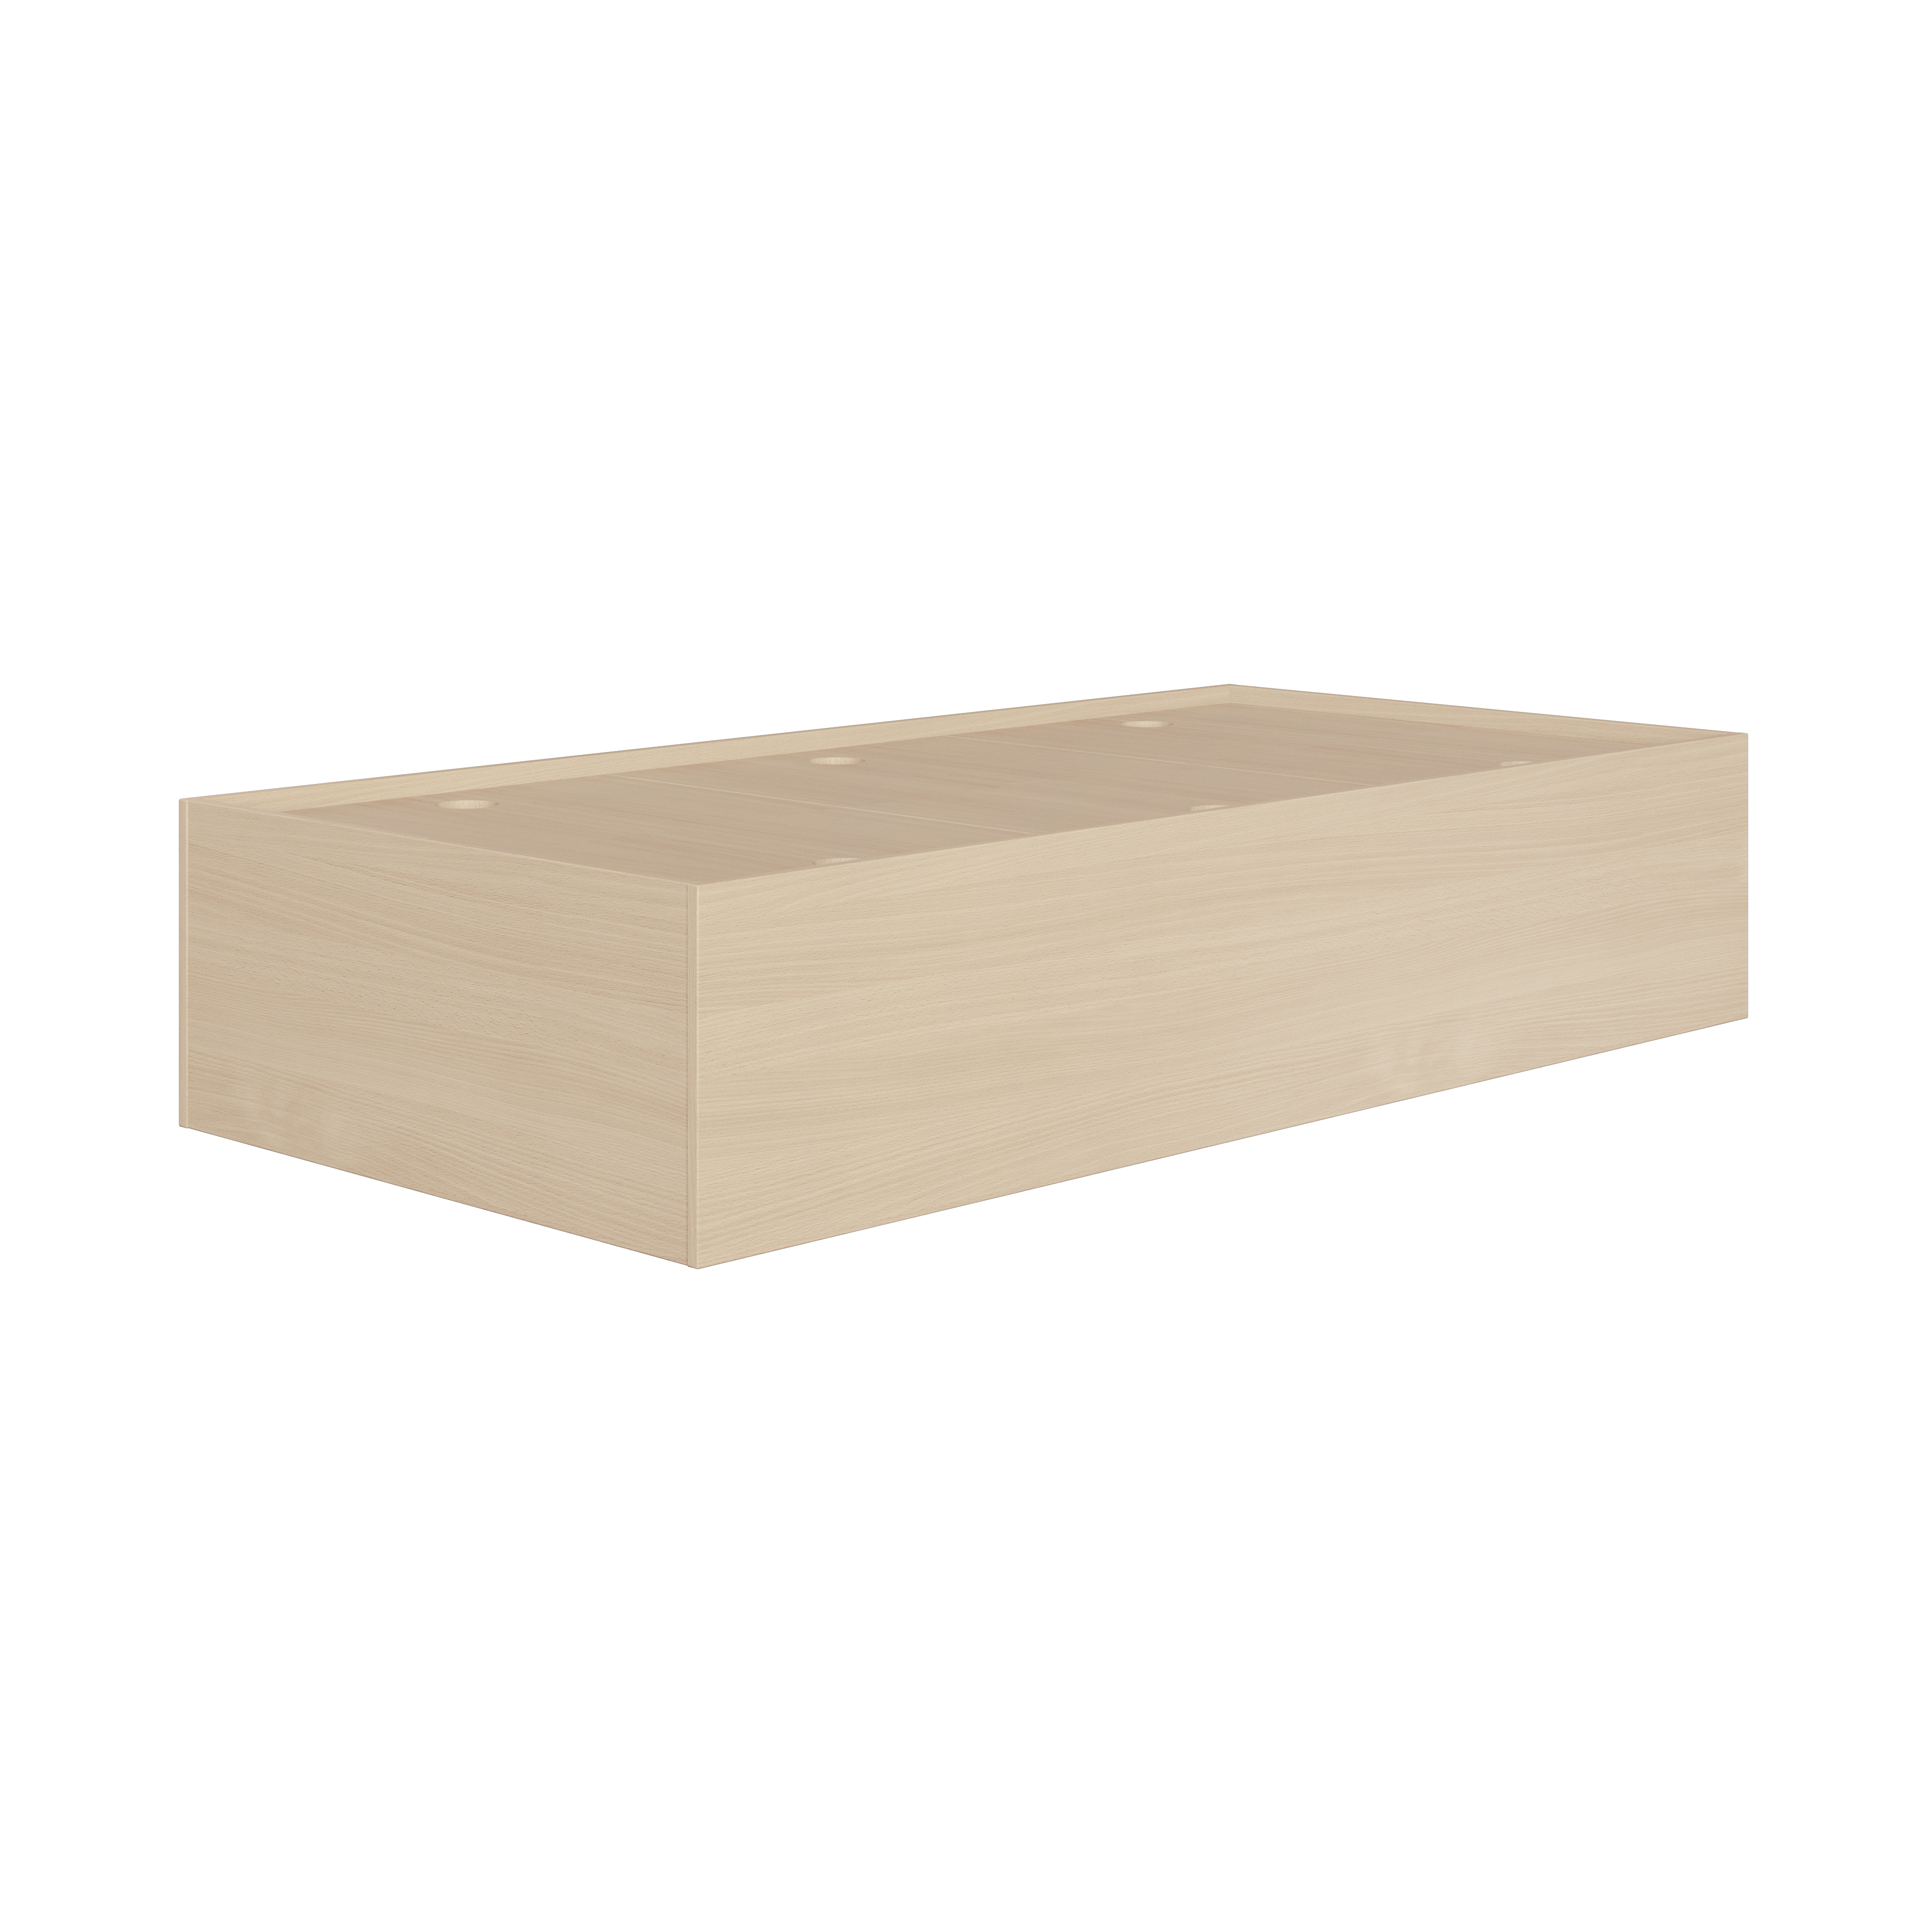 Box Bed - Wooden - Single (Flat packed)